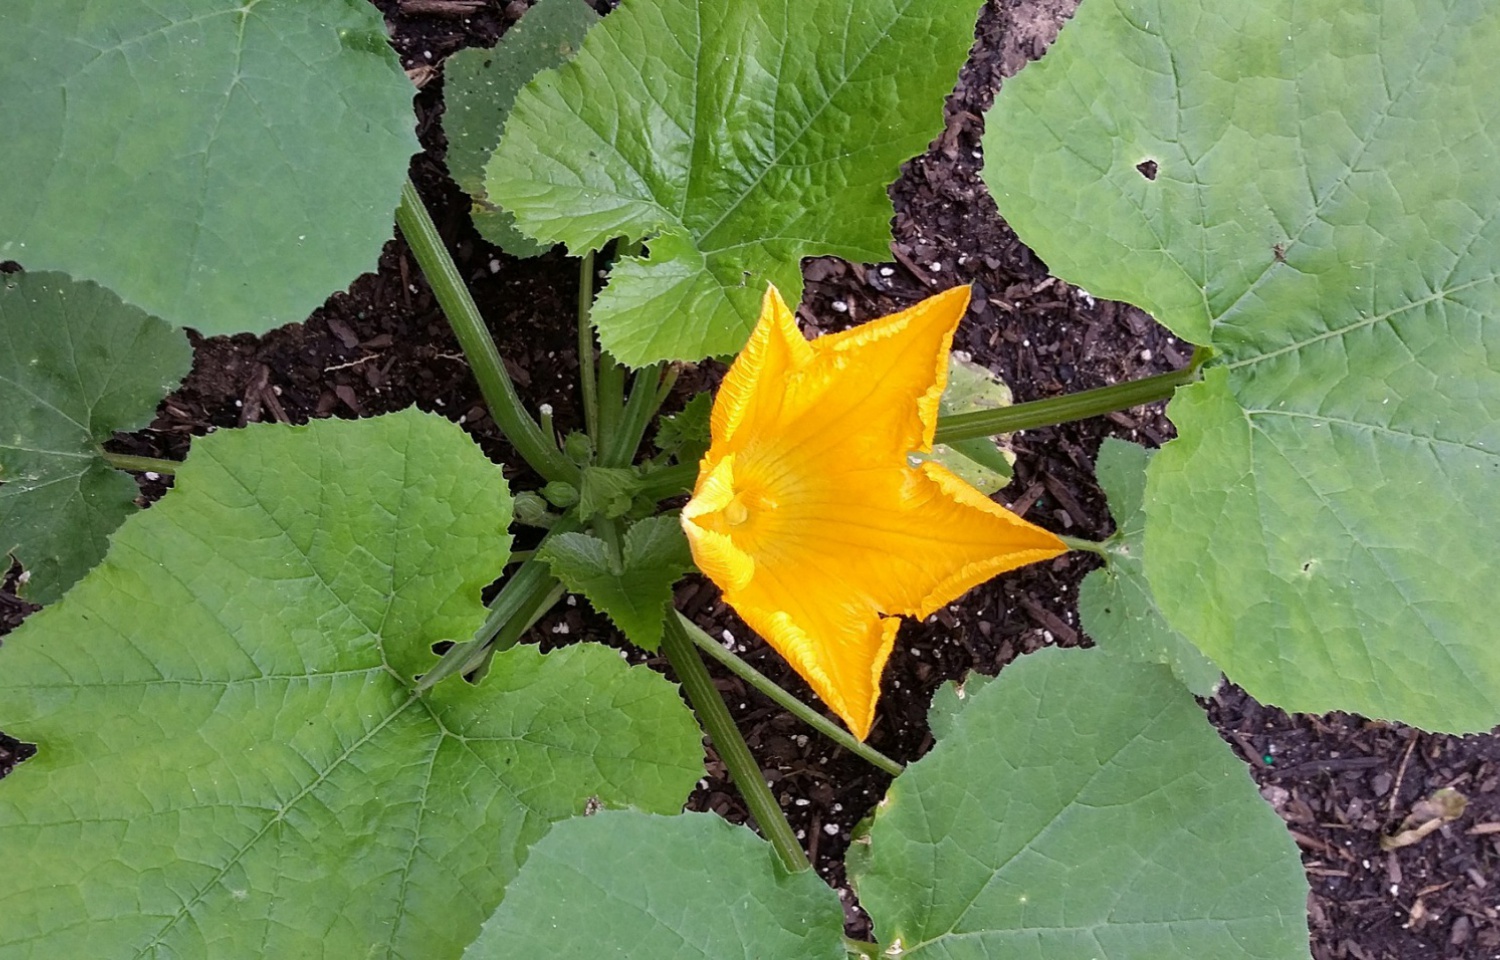 My Squash Plants Only Produce Male